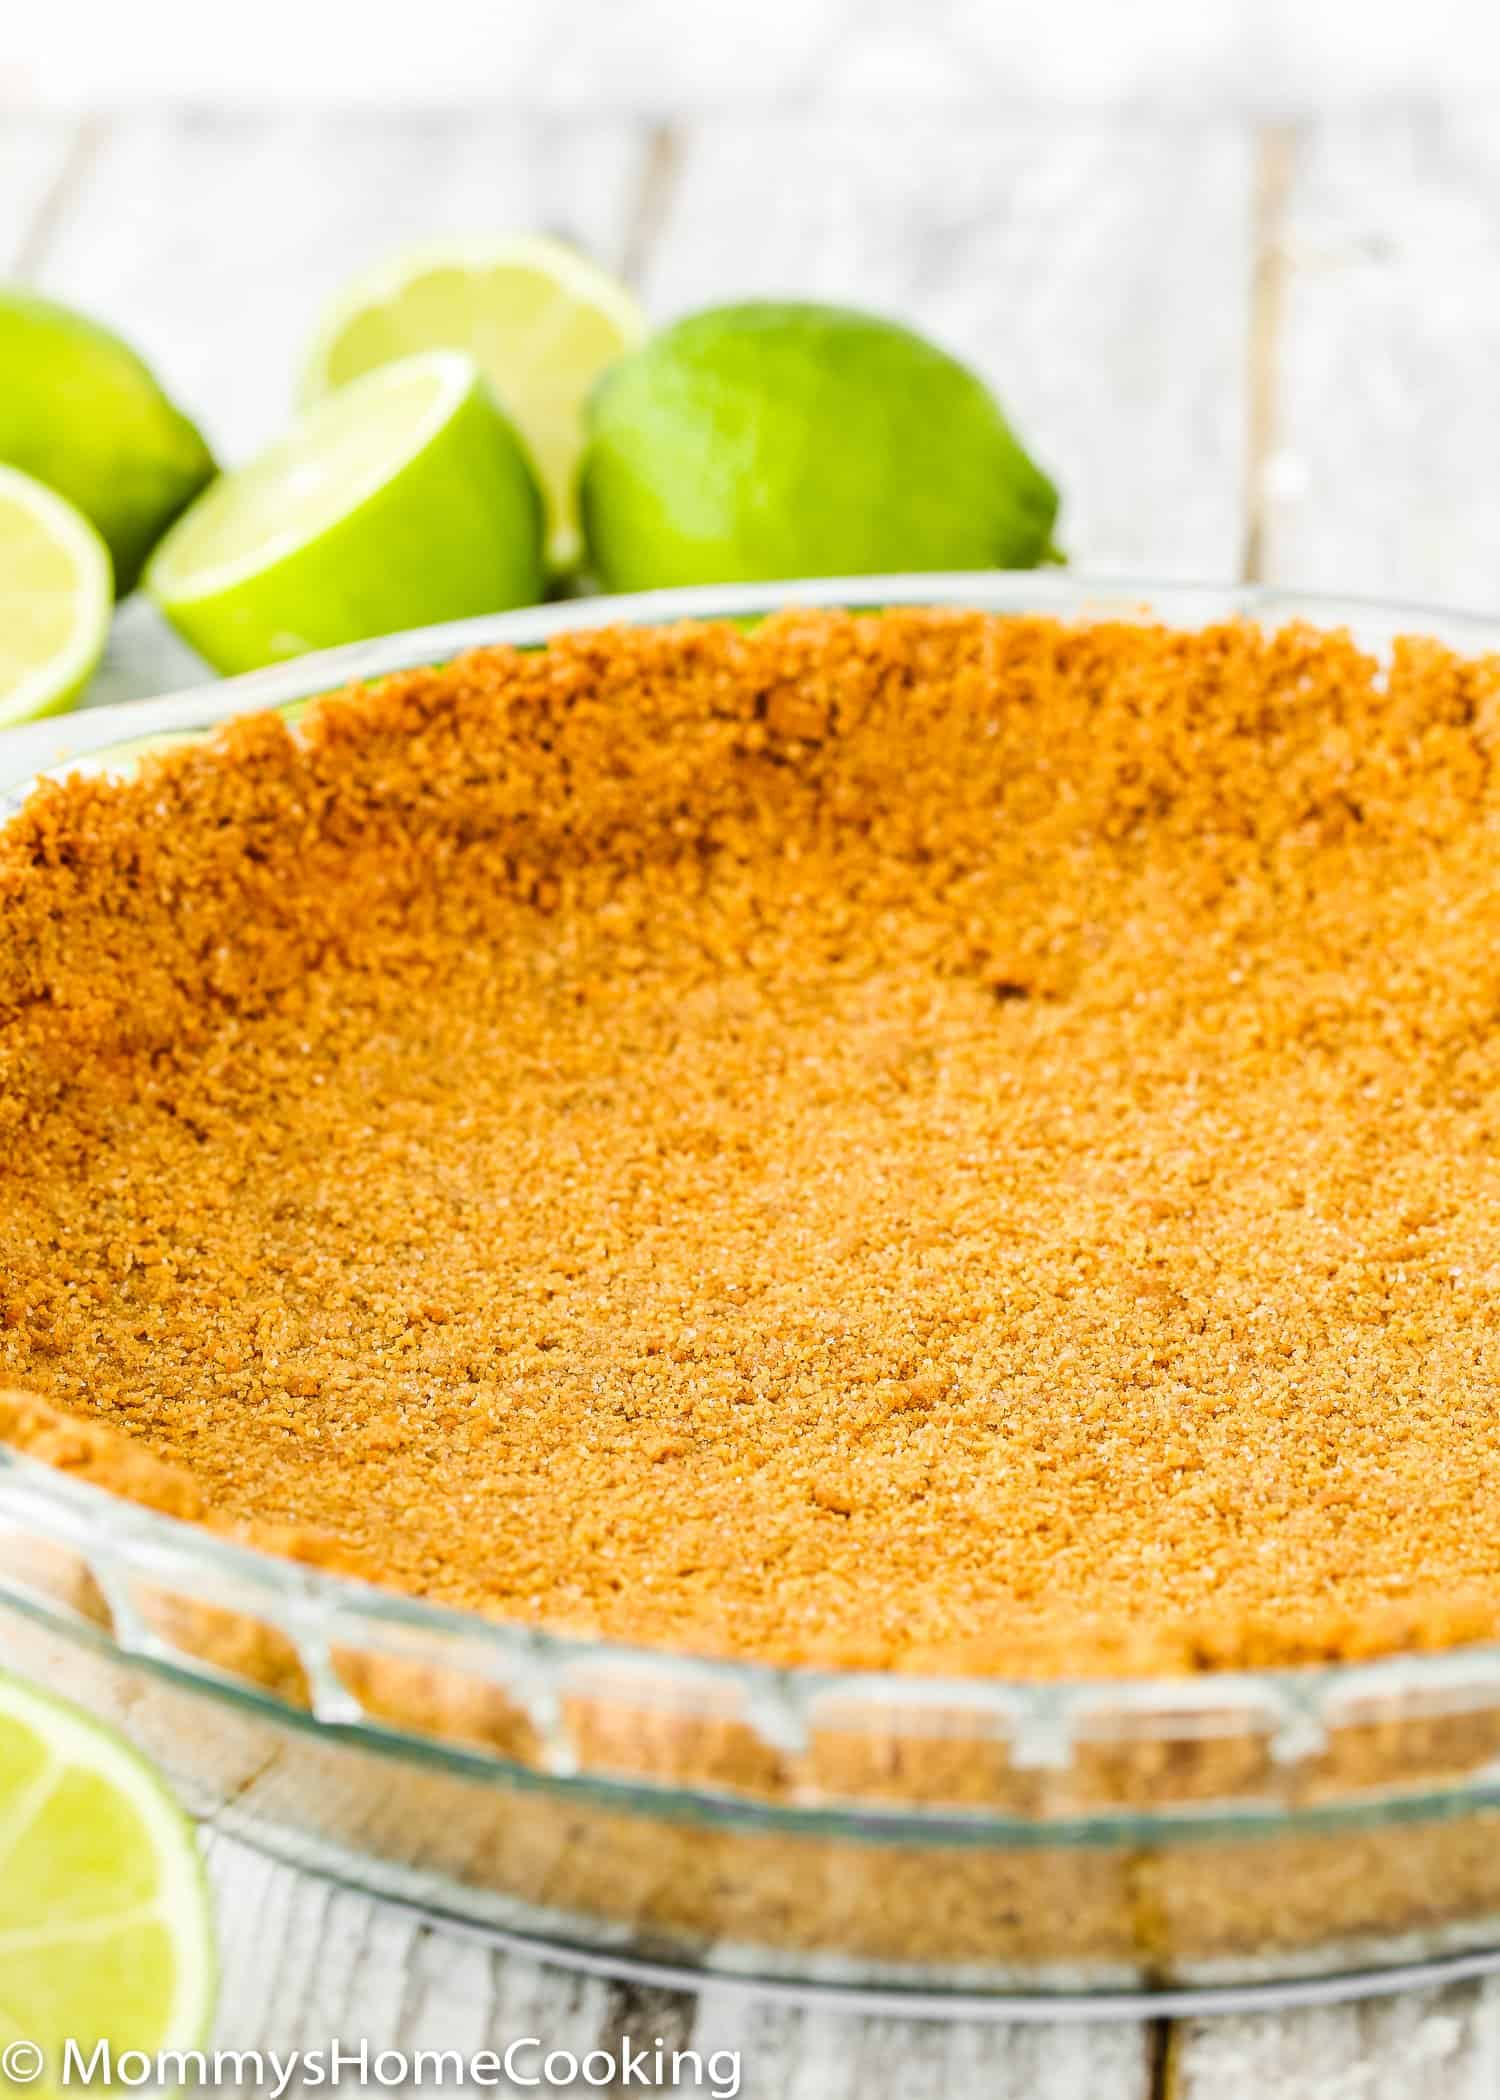 graham cracker crust in a pir dish with key lime on the background.